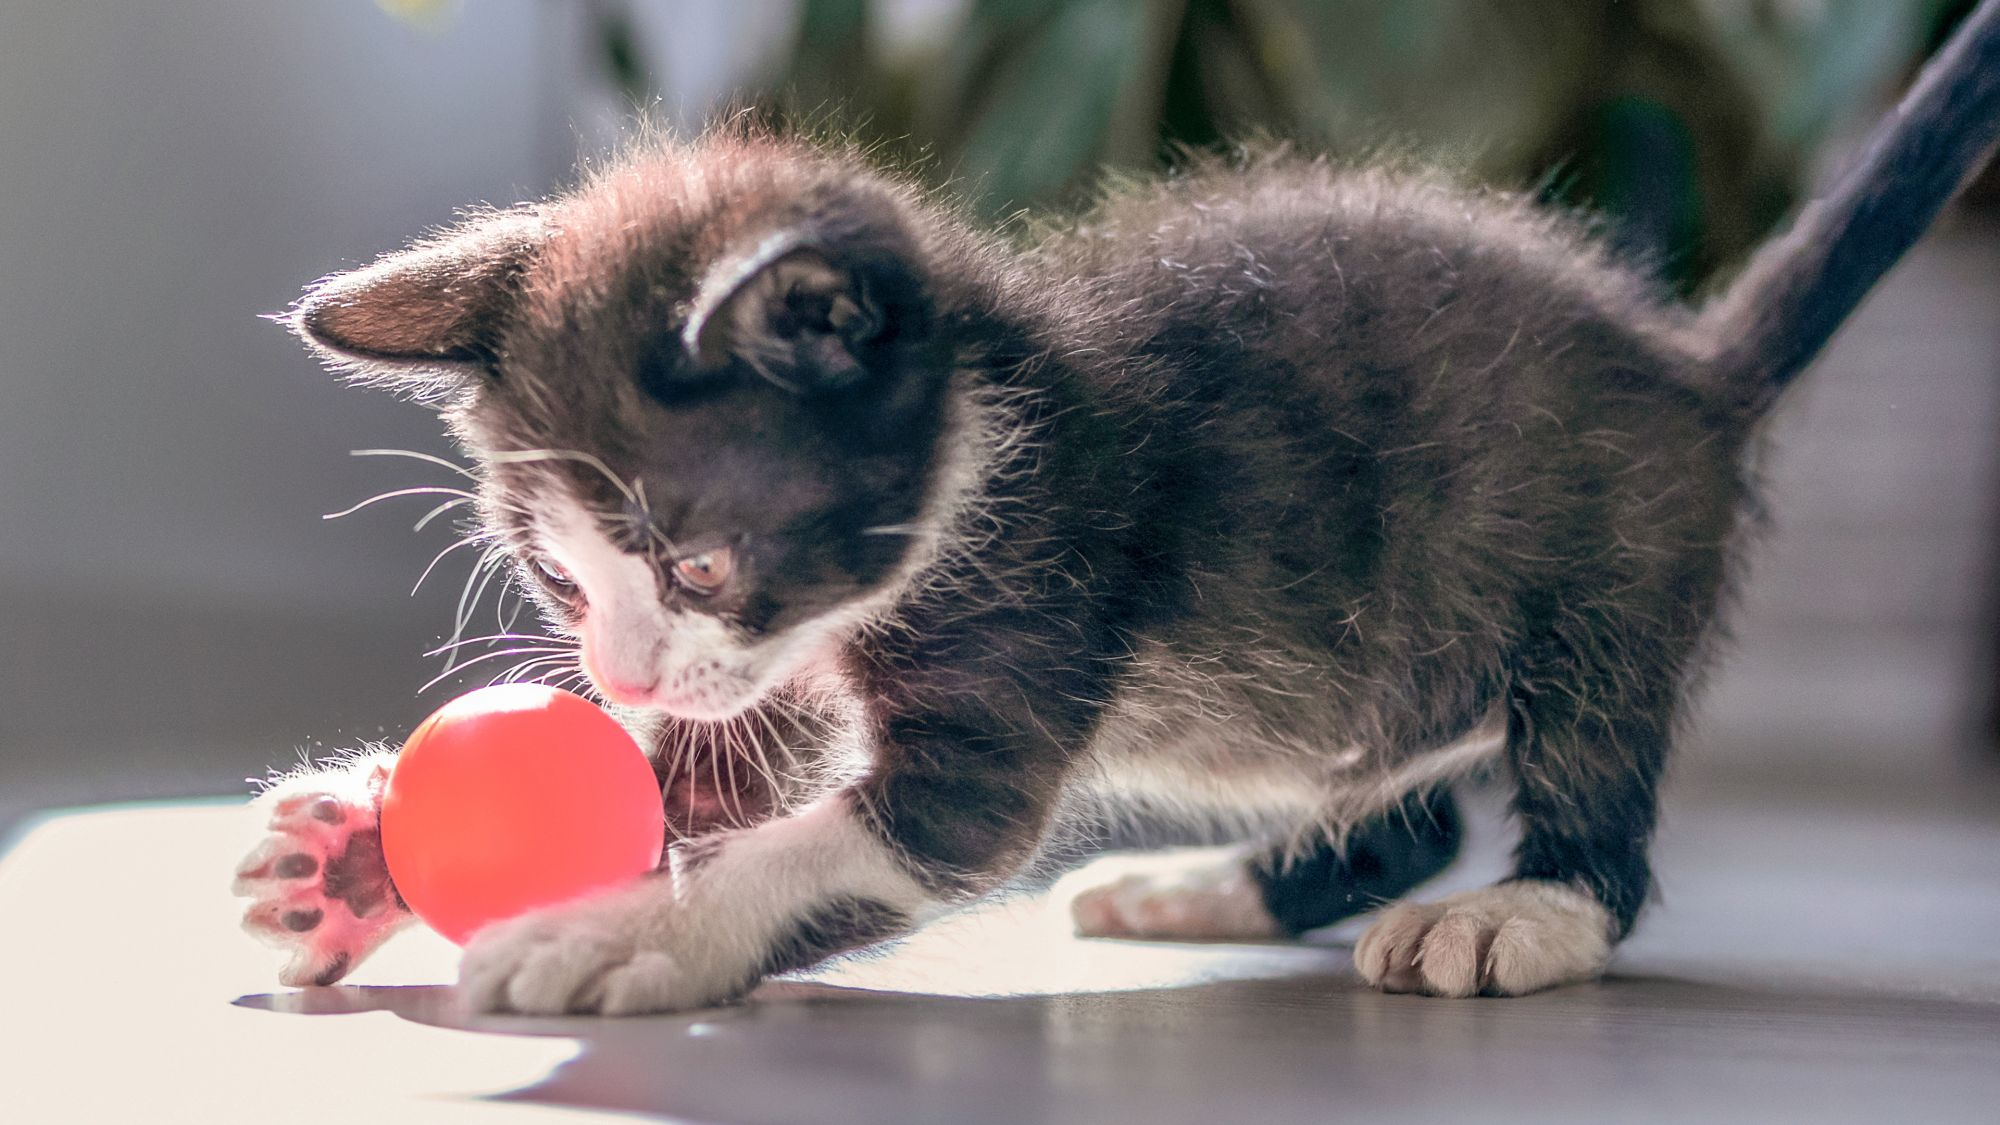 Black and white kitten standing inside playing with a ball